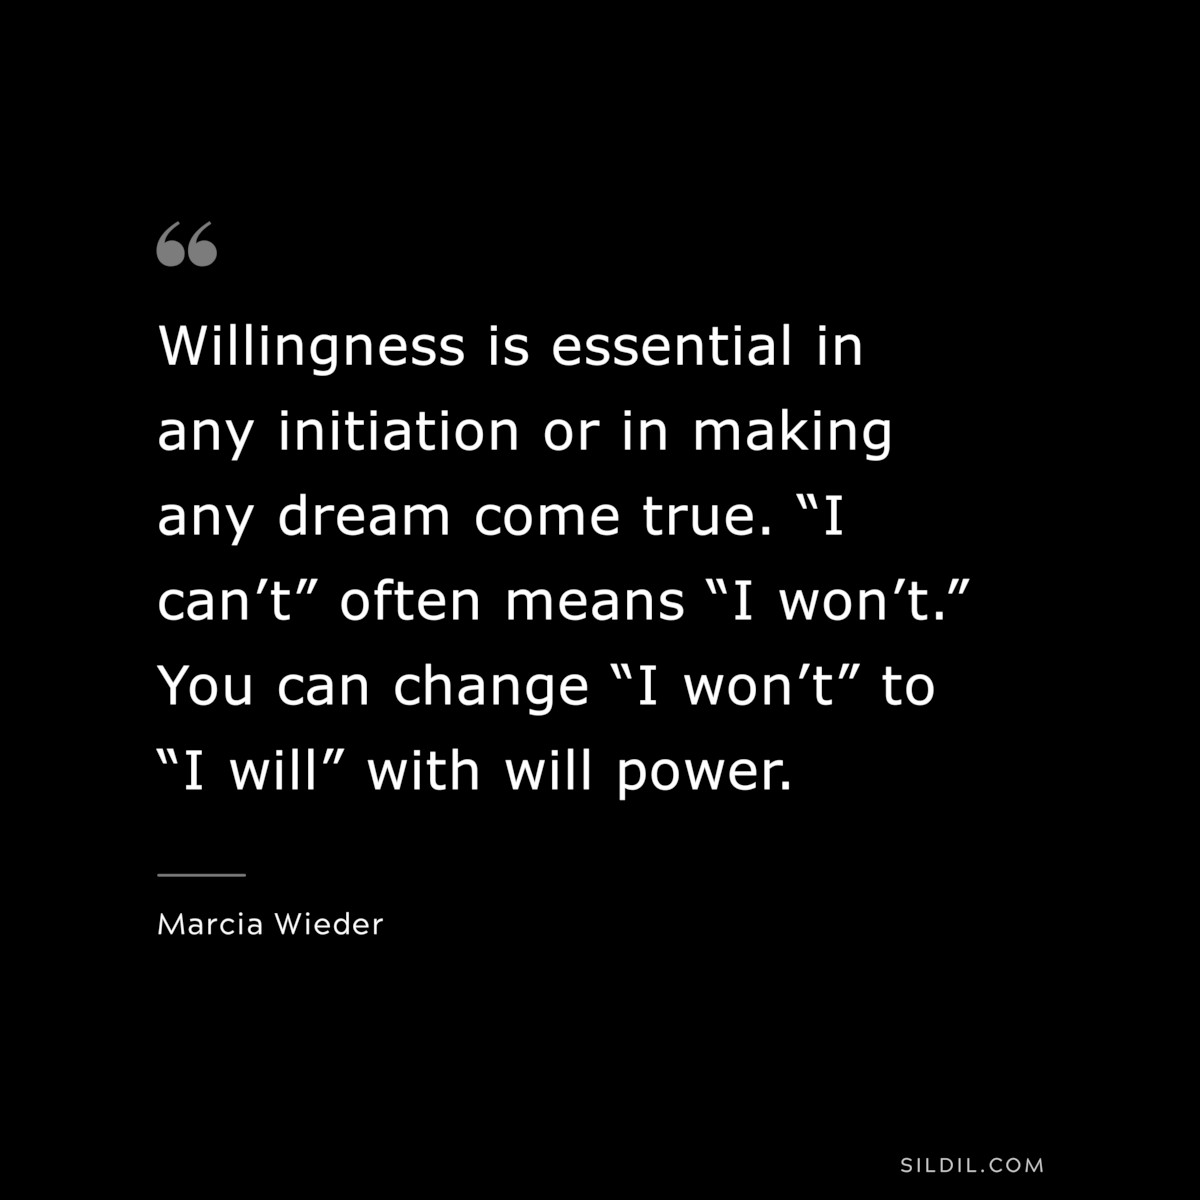 Willingness is essential in any initiation or in making any dream come true.  “I can’t” often means “I won’t.”  You can change “I won’t” to “I will” with will power. ― Marcia Wieder